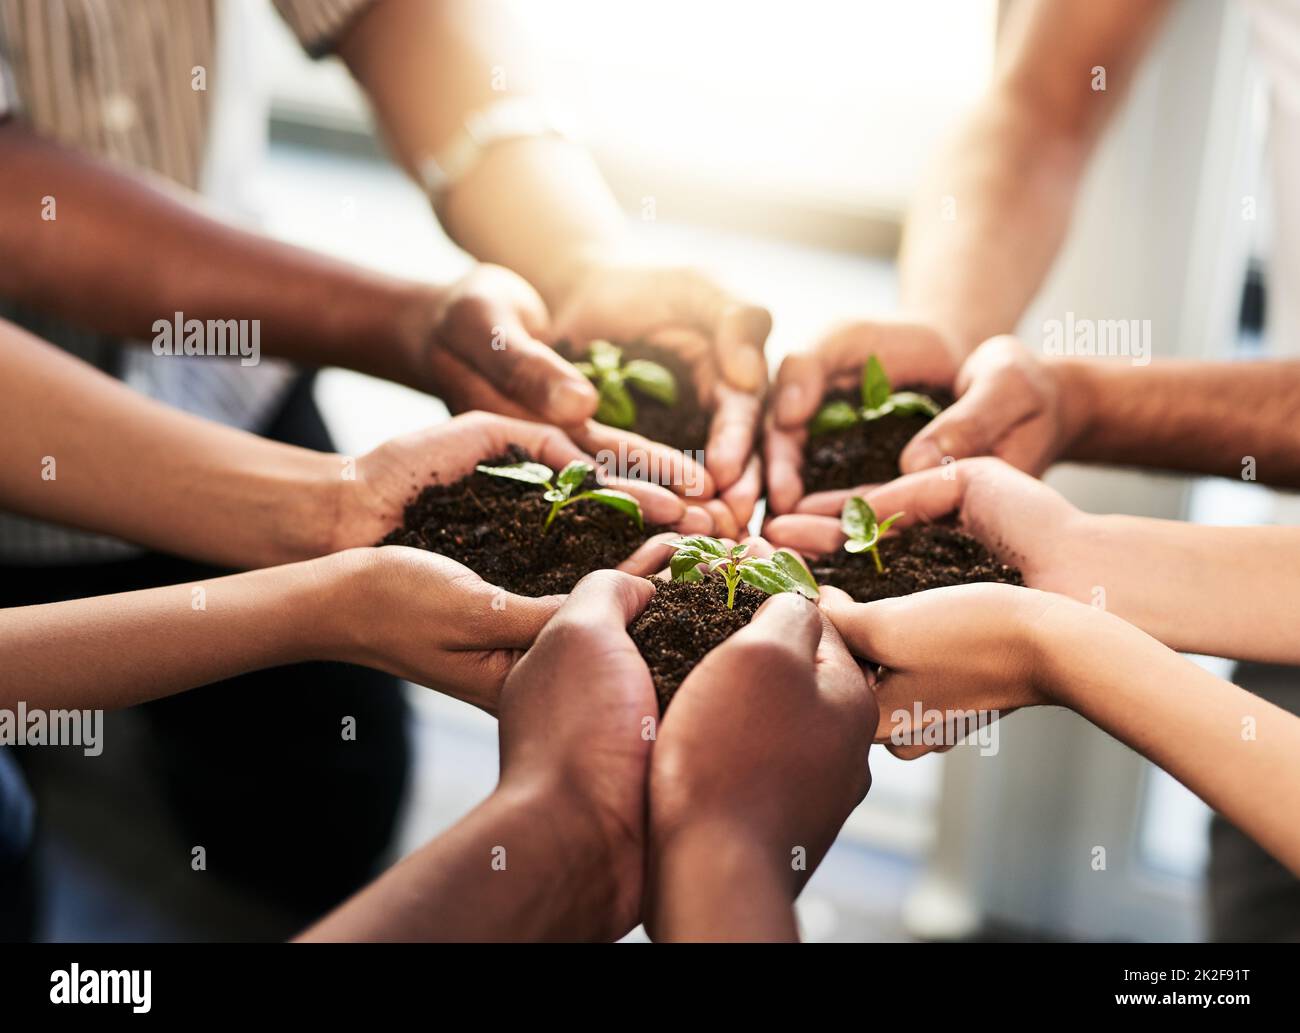 The future is in our hands. Cropped shot of a group of unrecognizable people holding plants growing out of soil. Stock Photo